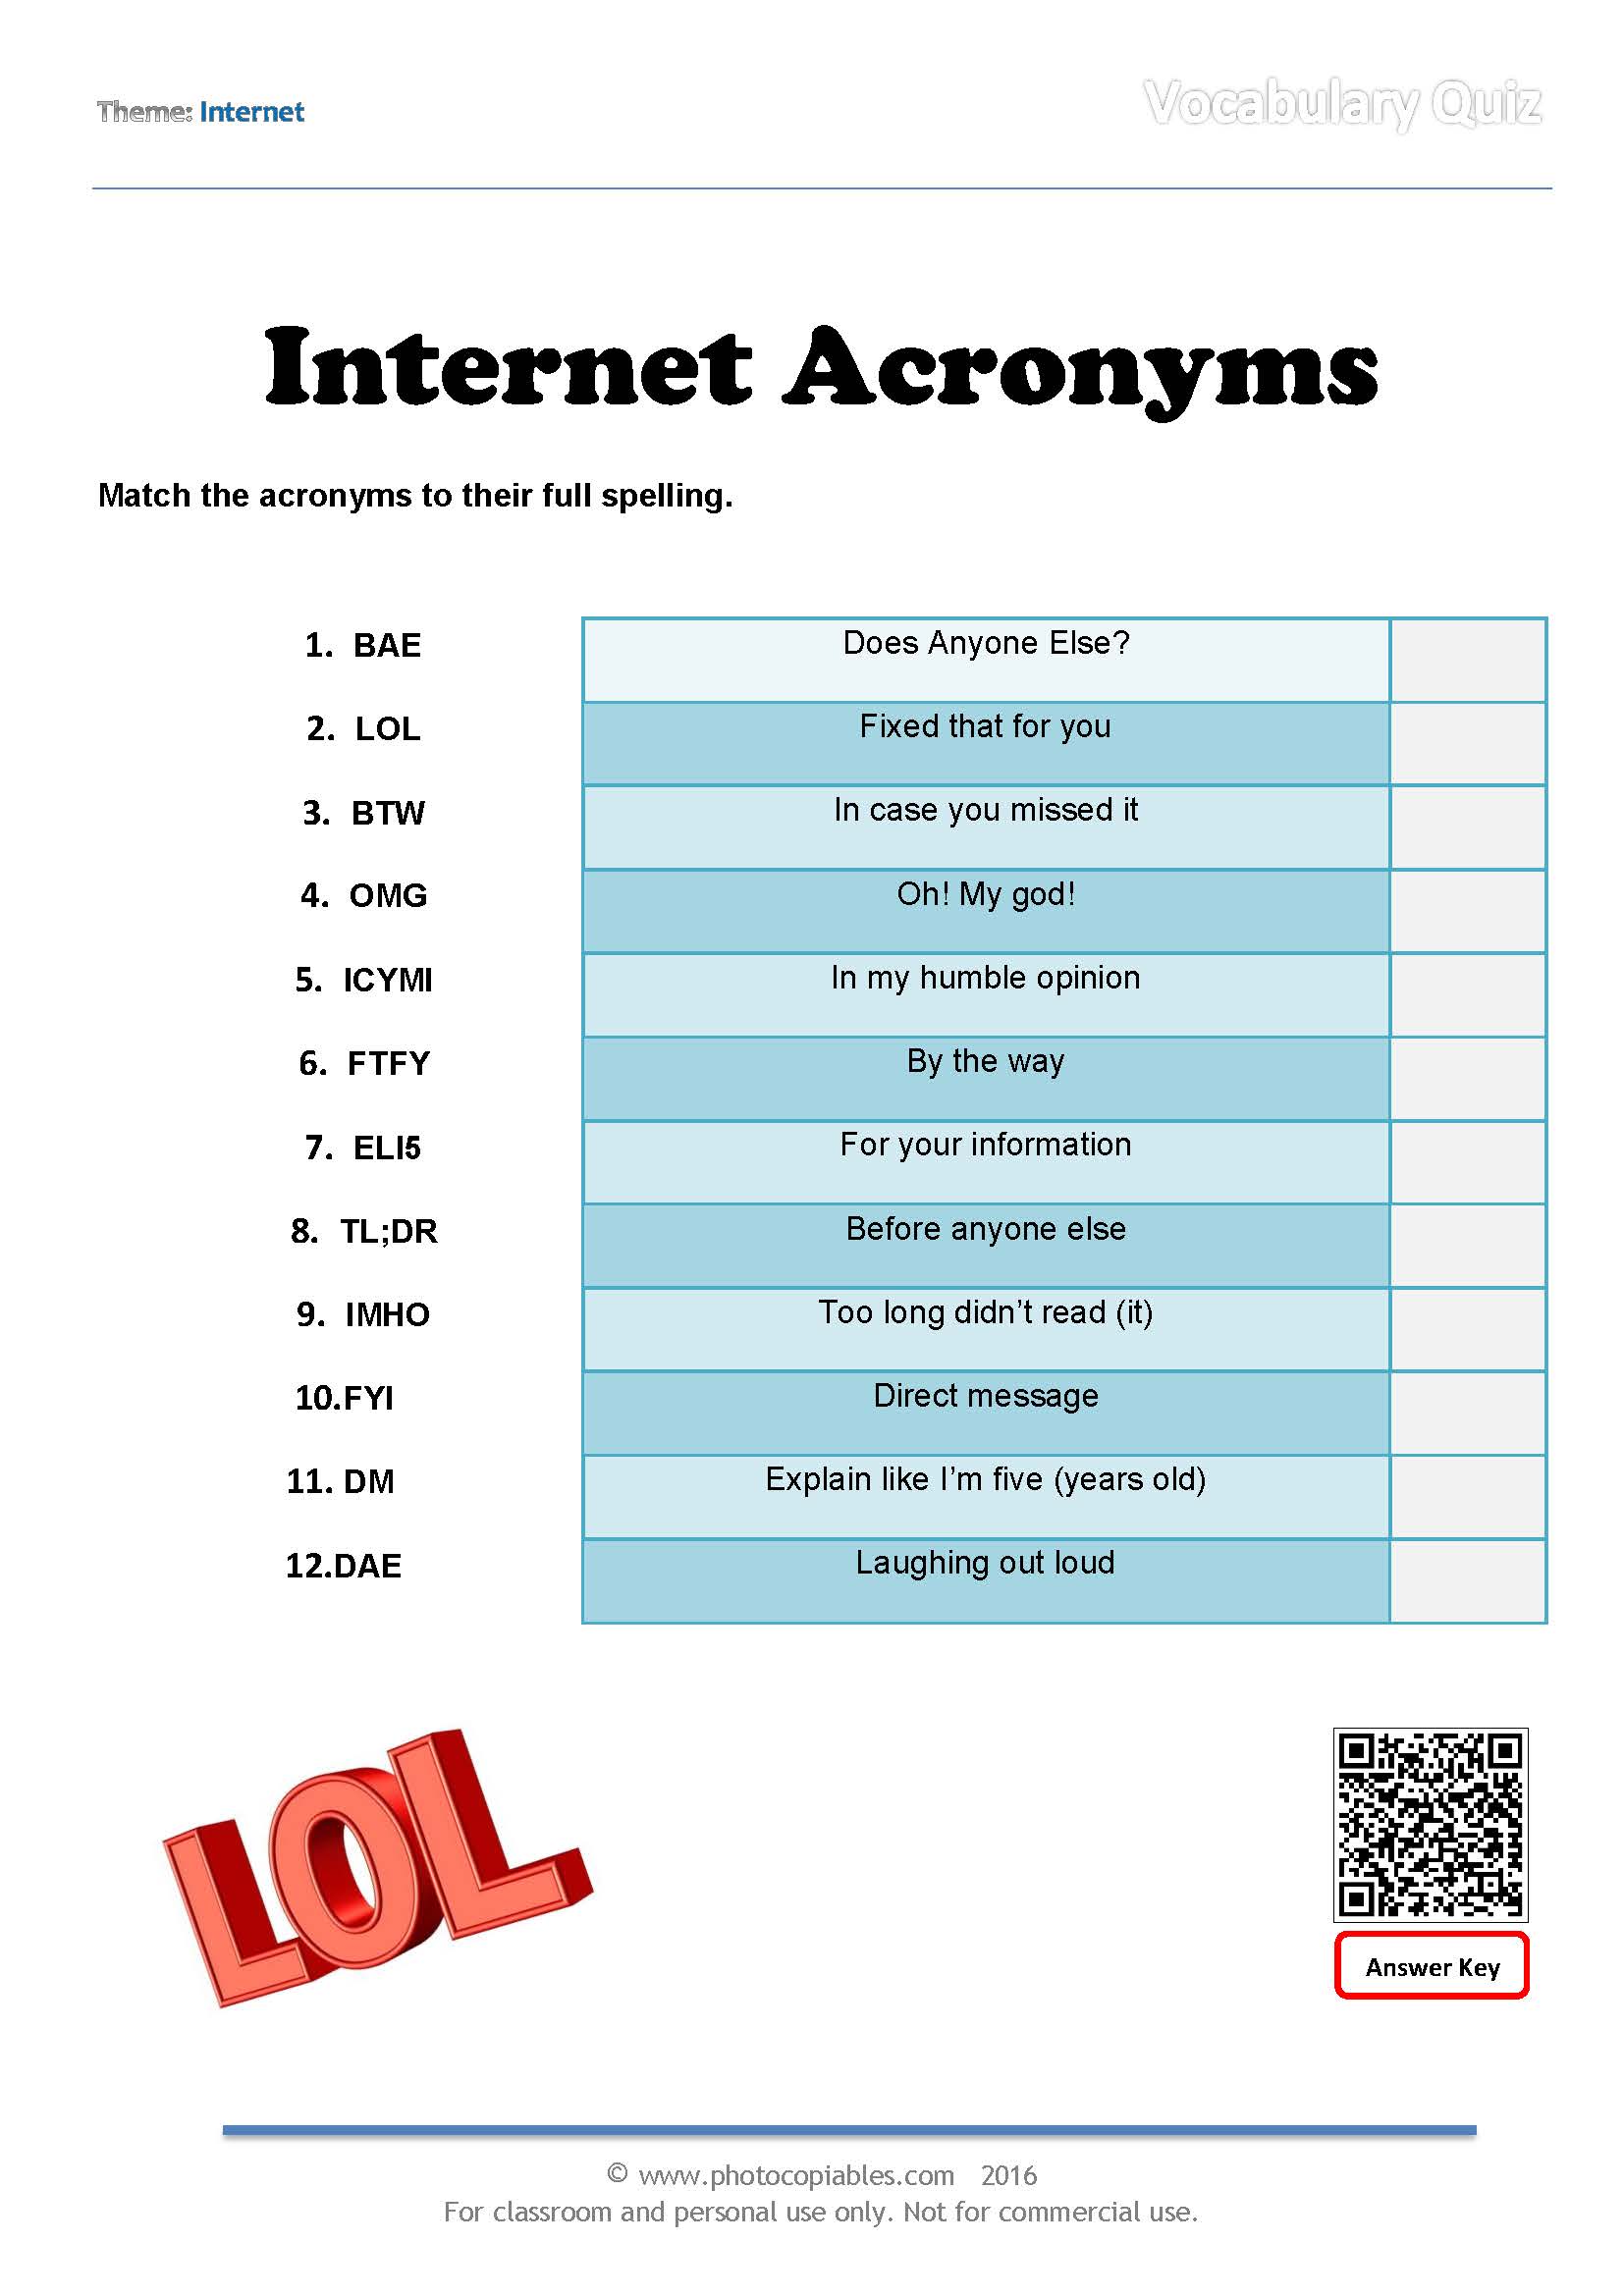 How Well Do You Know Chat Slang Acronyms? 🧠 INTERNET SLANG ACRONYM QUIZ